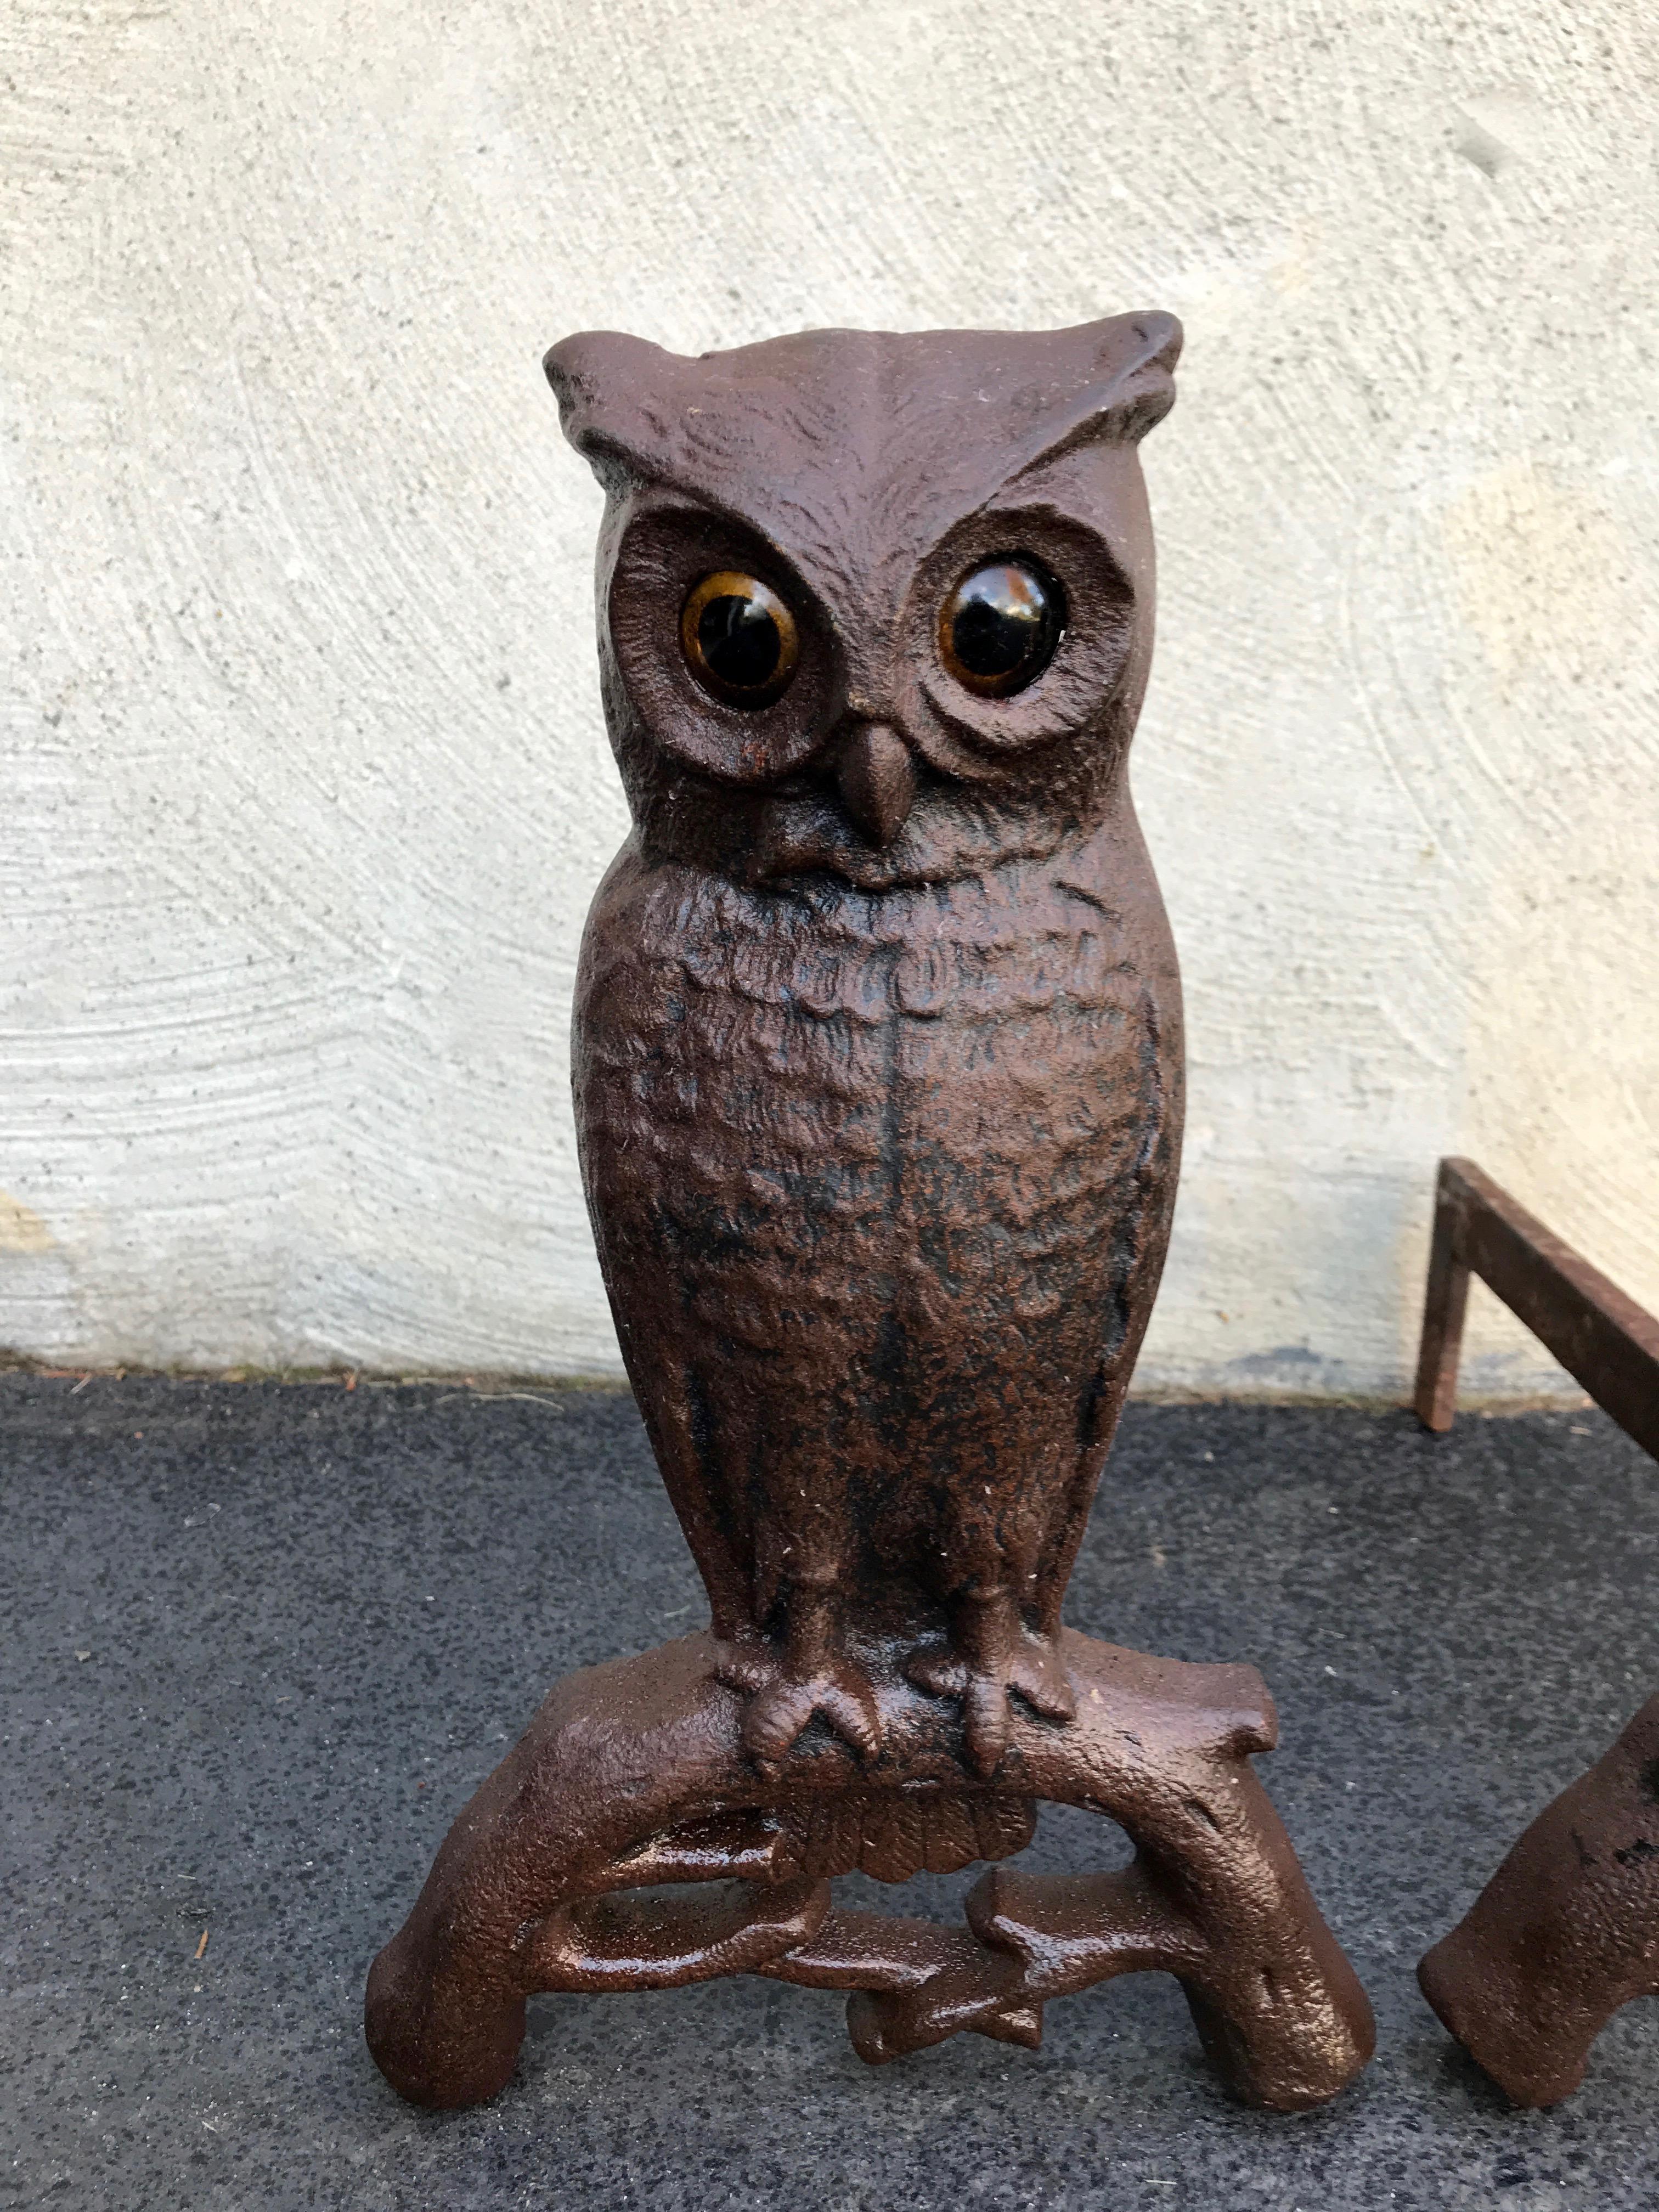 Cast iron owl andirons with glass eyes, late 19th century. Westport, Ma. No chips or cracks in metal or eyes. The glass eyes are brown with large black pupils. Original with excellent patina. Measures: 16